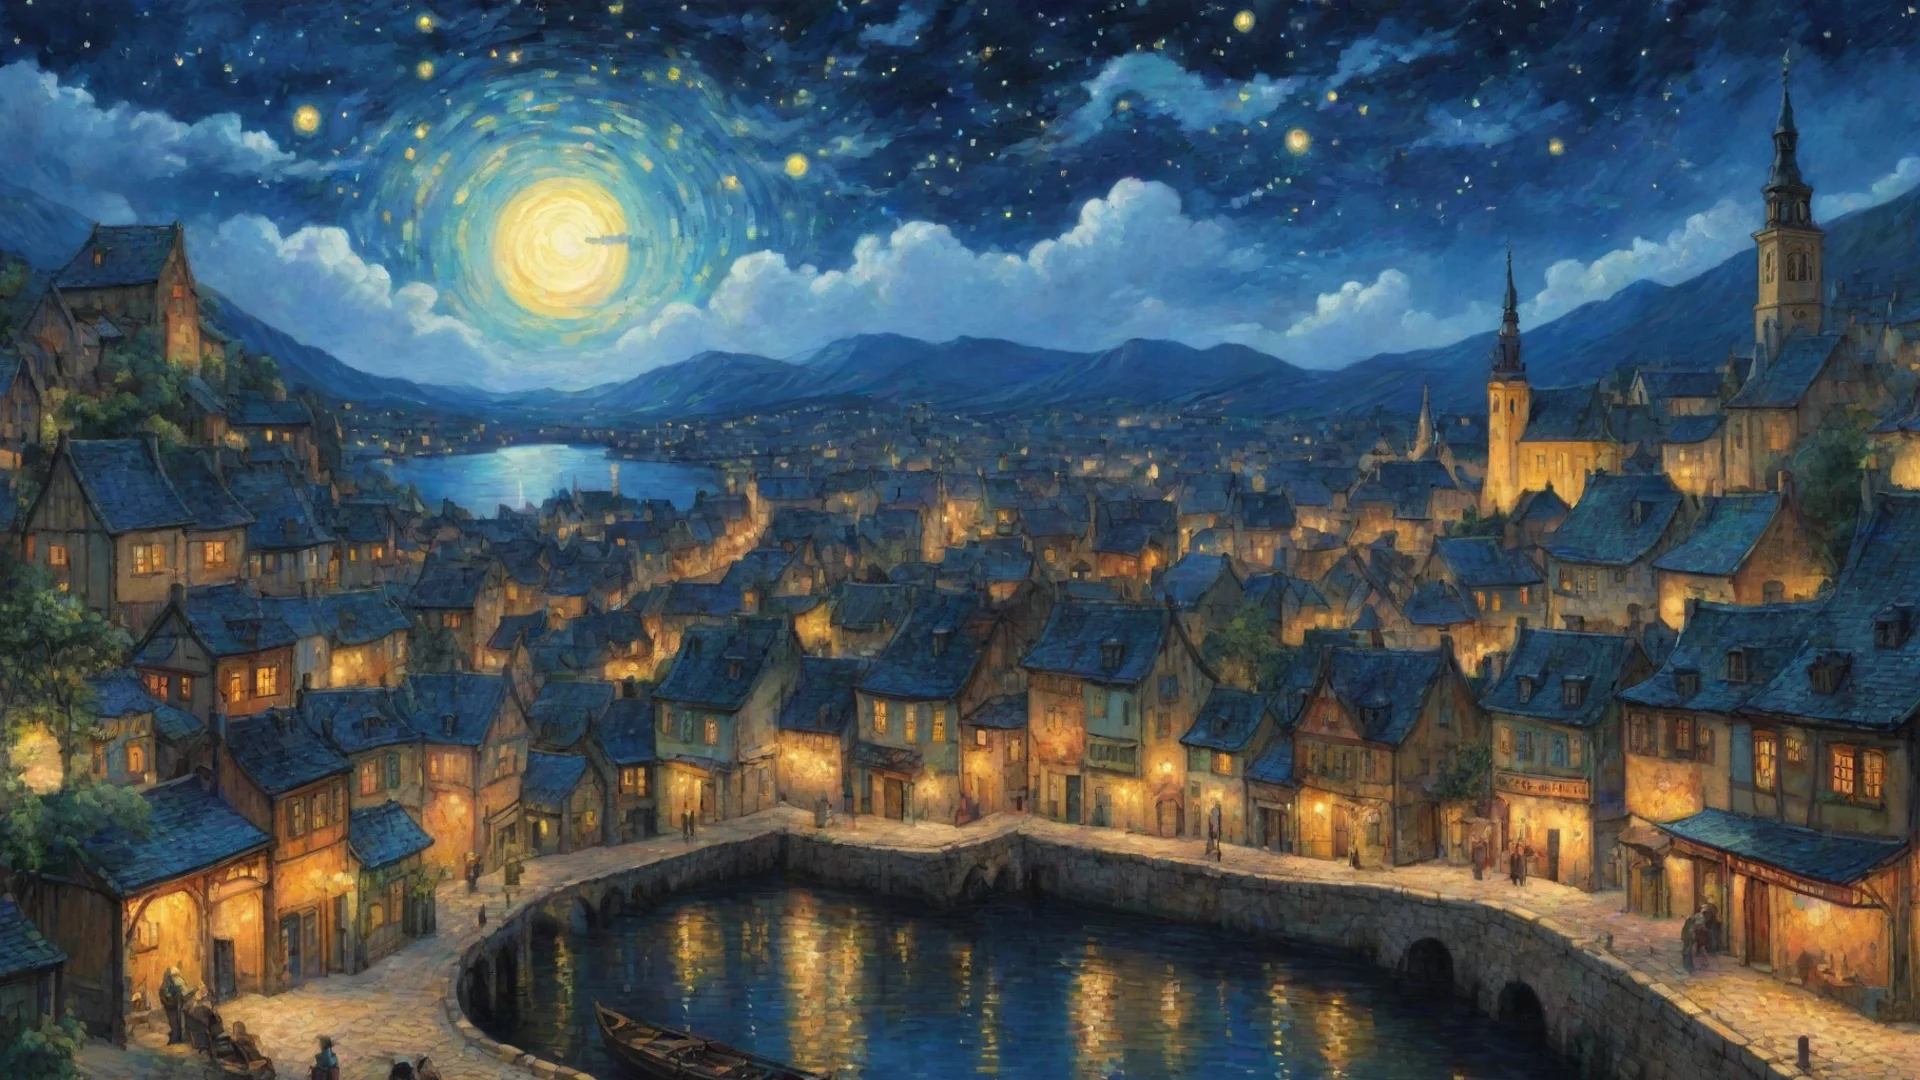 epic town lit up at night sky epic lovely artistic ghibli van gogh happyness bliss peace  detailed asthetic hd wow wide